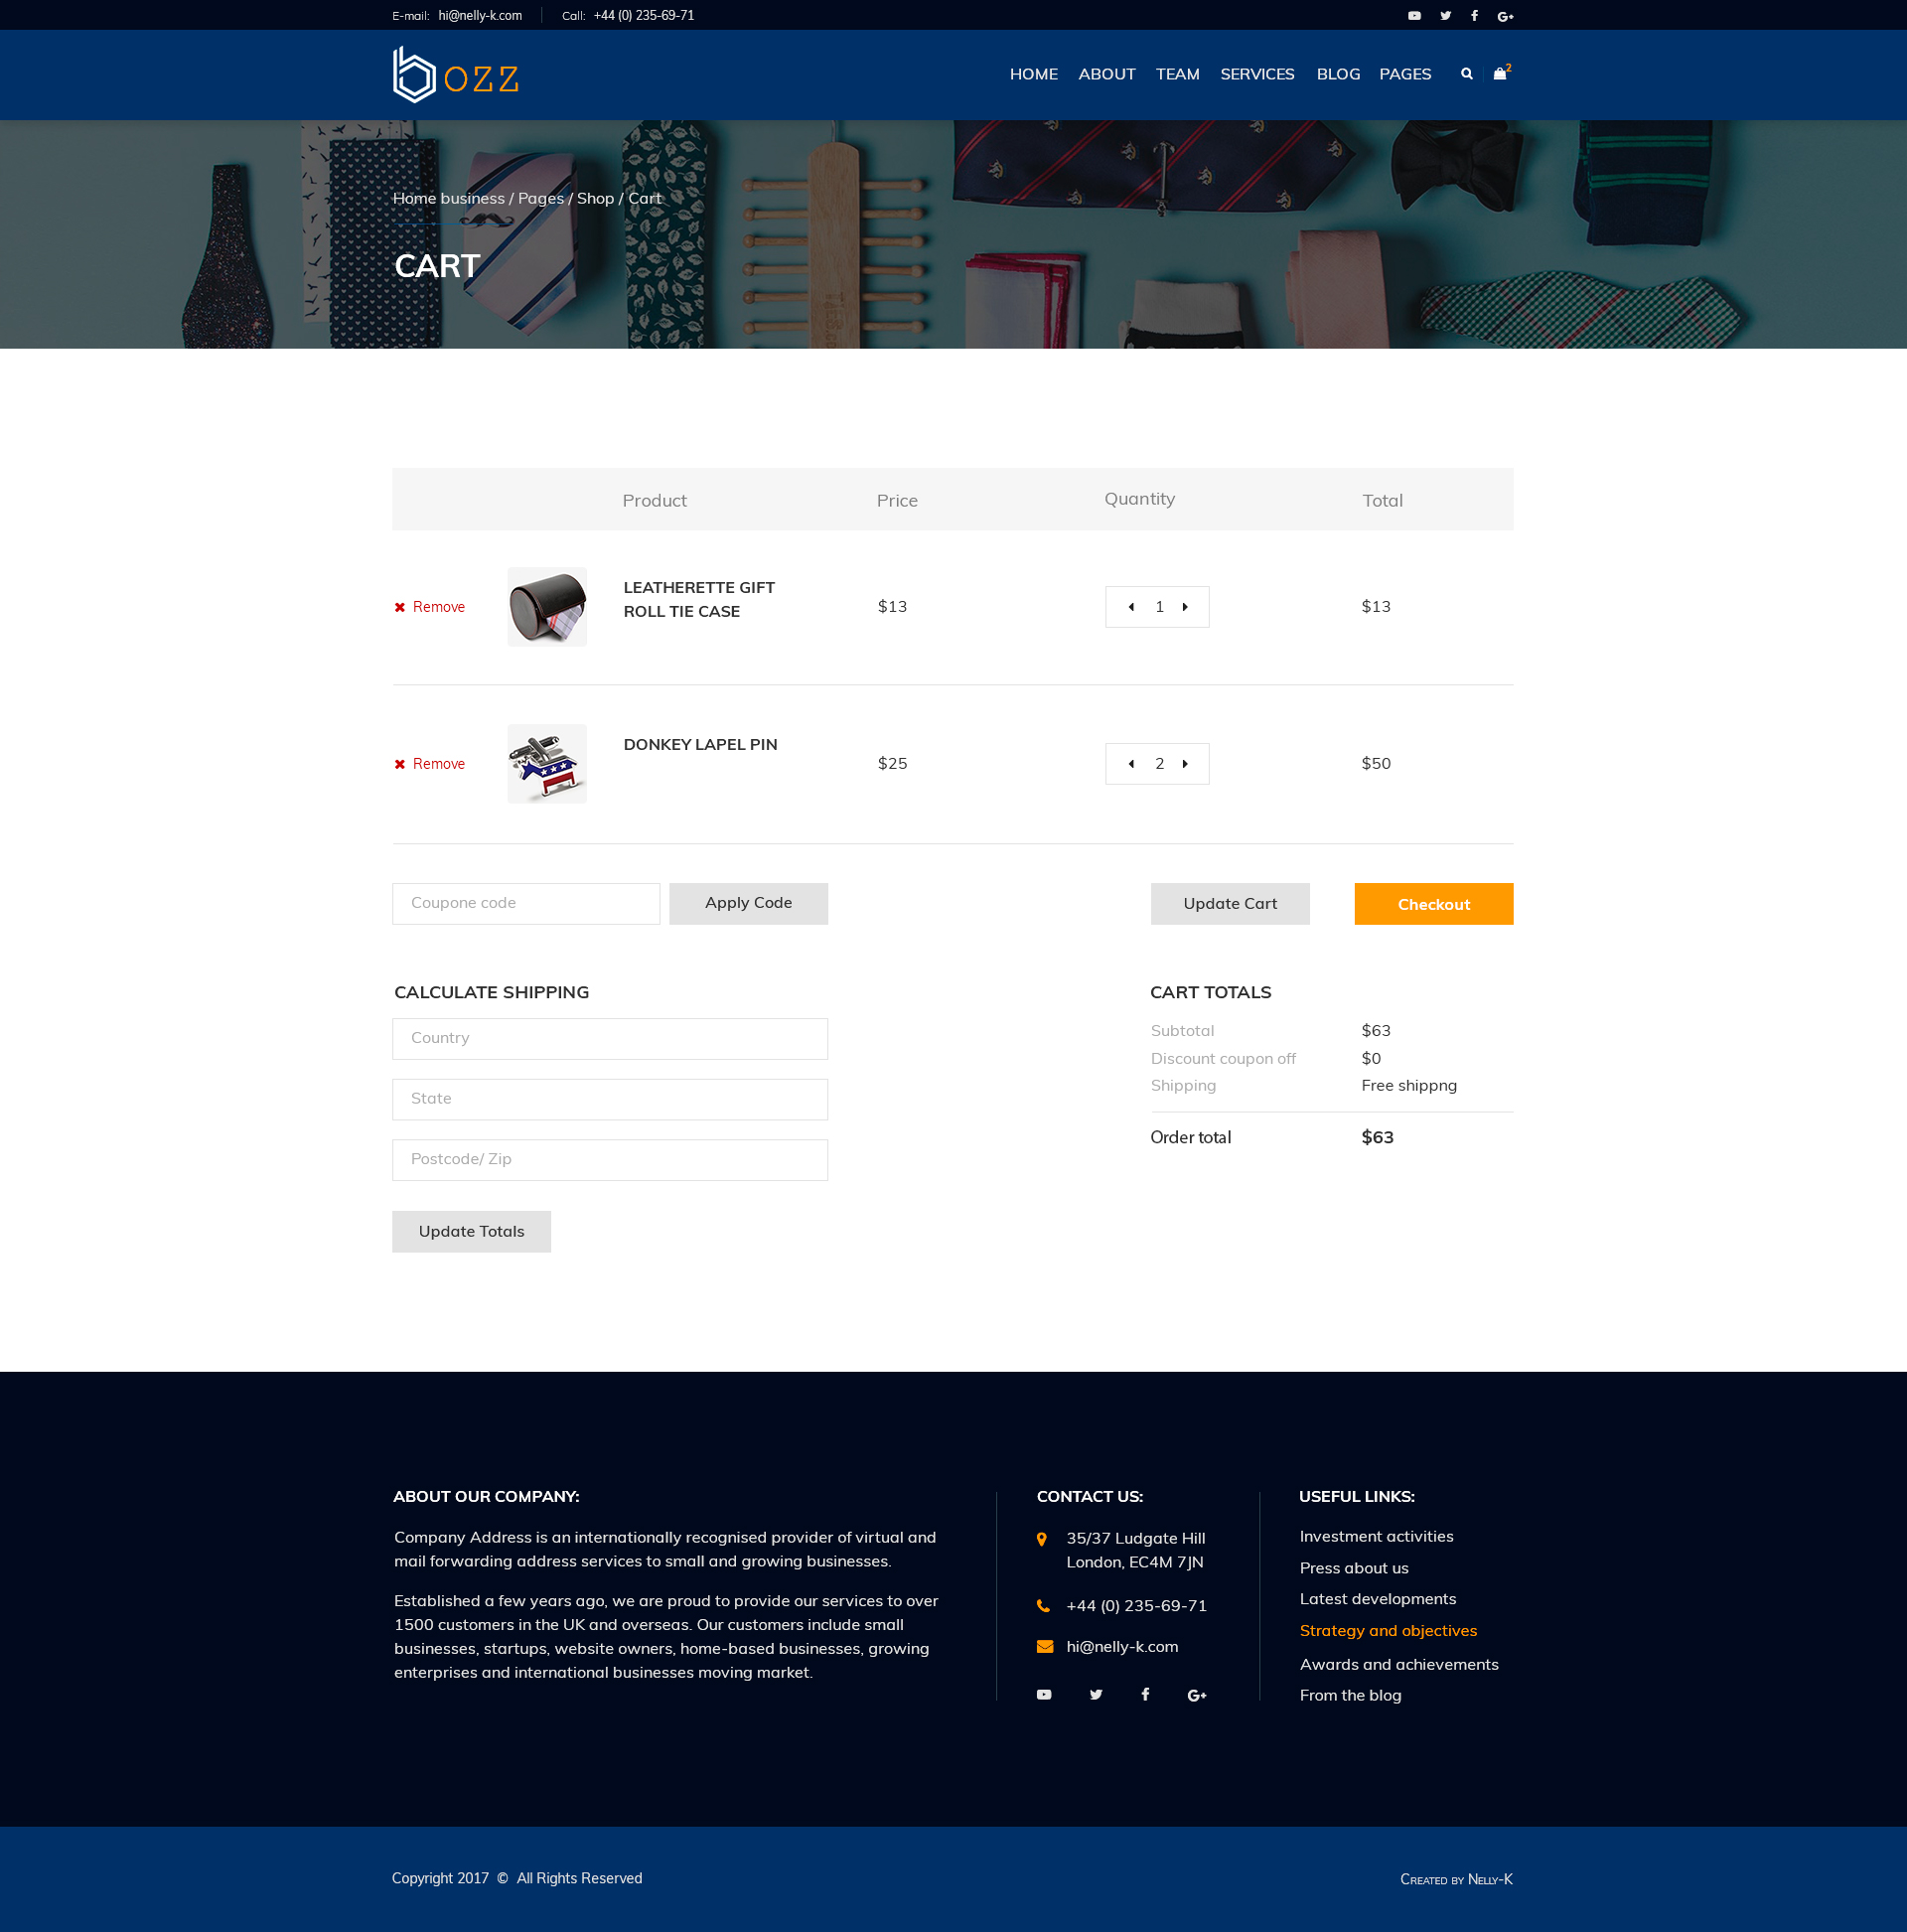 Bozz — Corporate and Business PSD Template